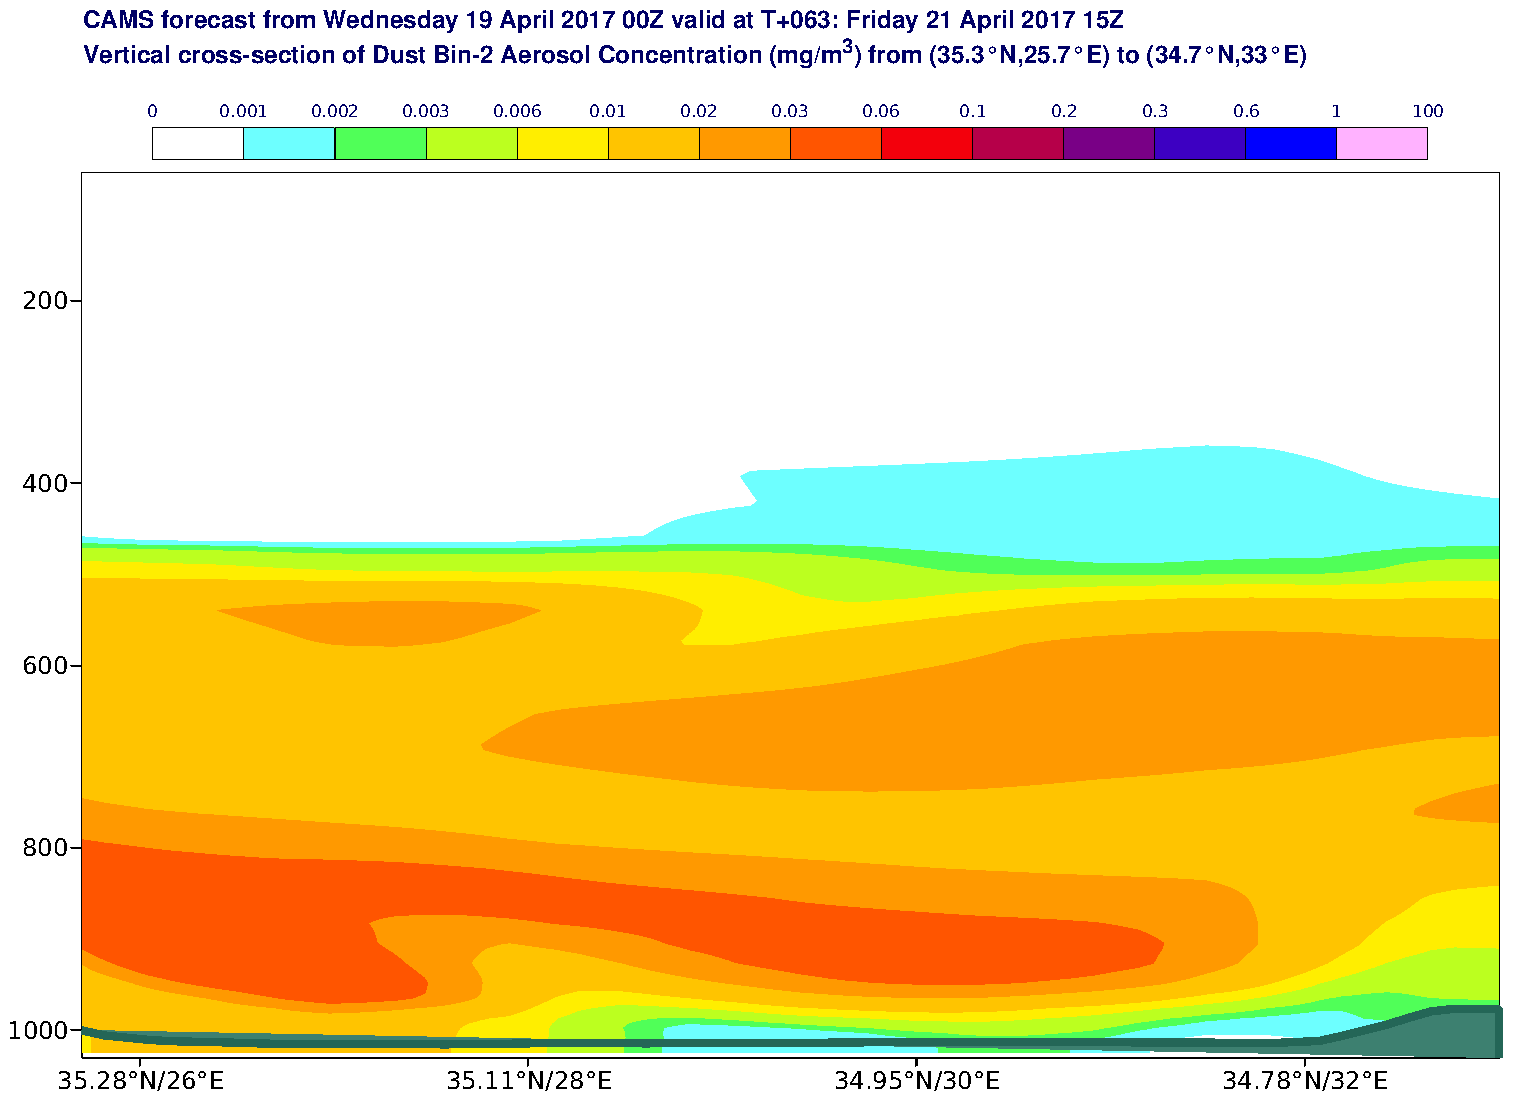 Vertical cross-section of Dust Bin-2 Aerosol Concentration (mg/m3) valid at T63 - 2017-04-21 15:00